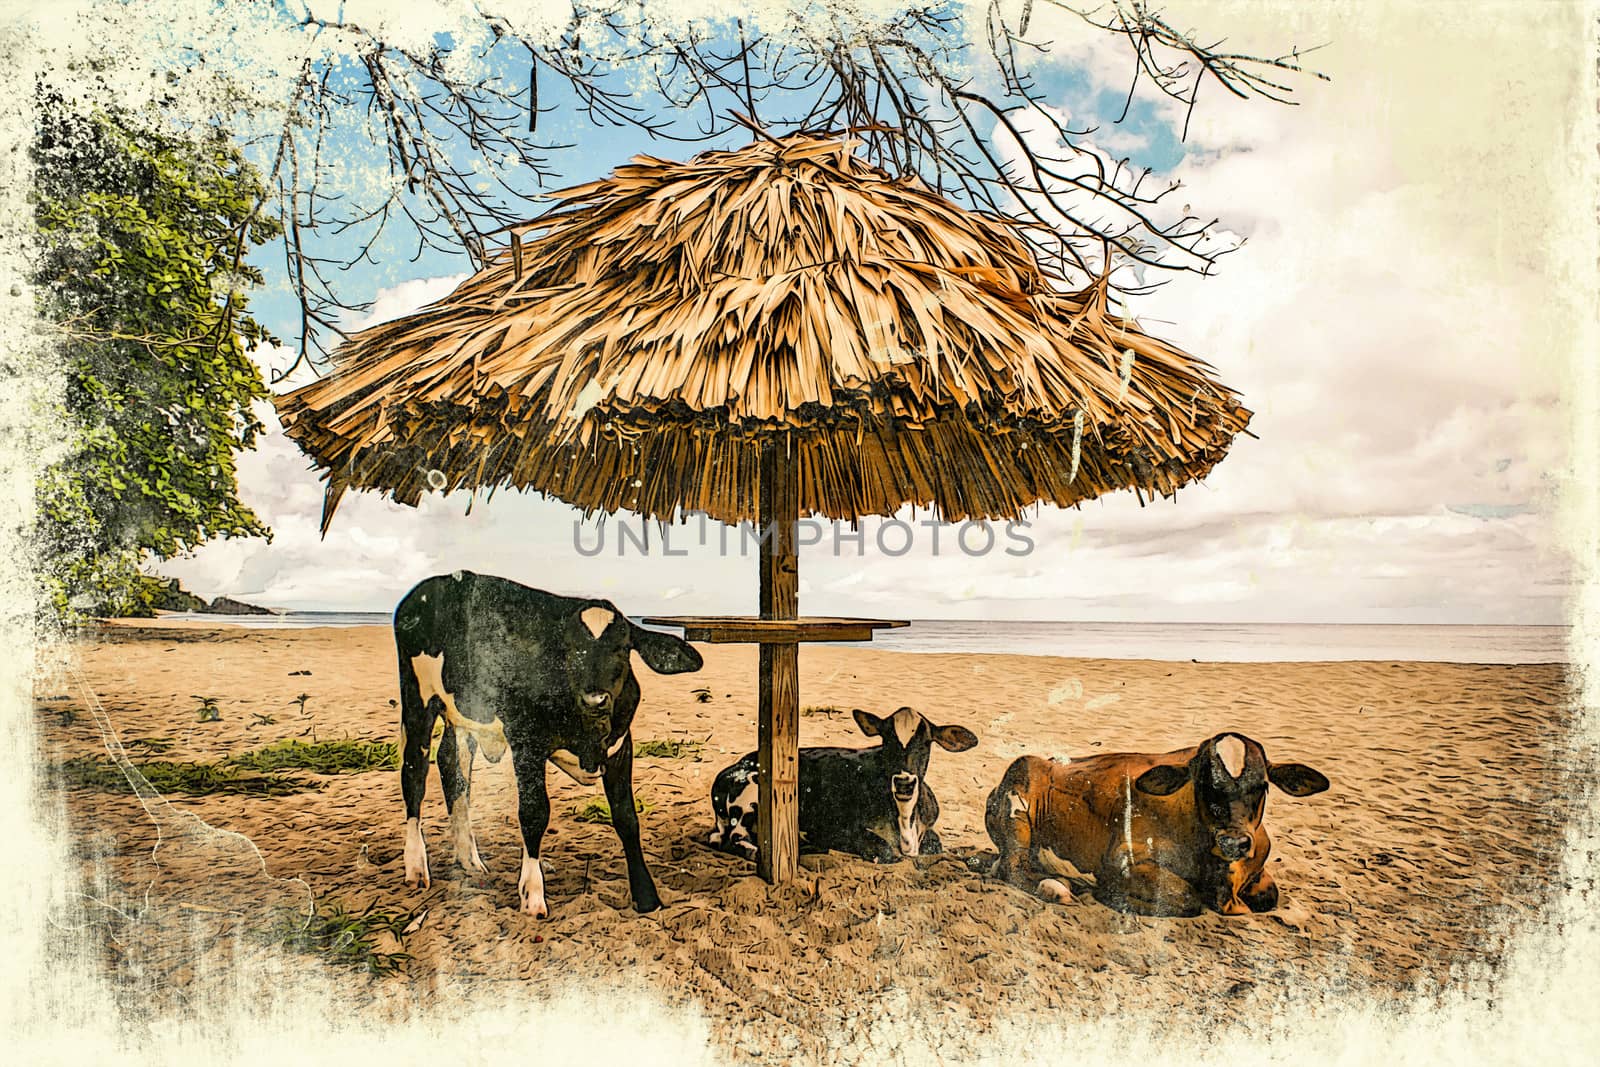 Cows on vacation by Sportactive